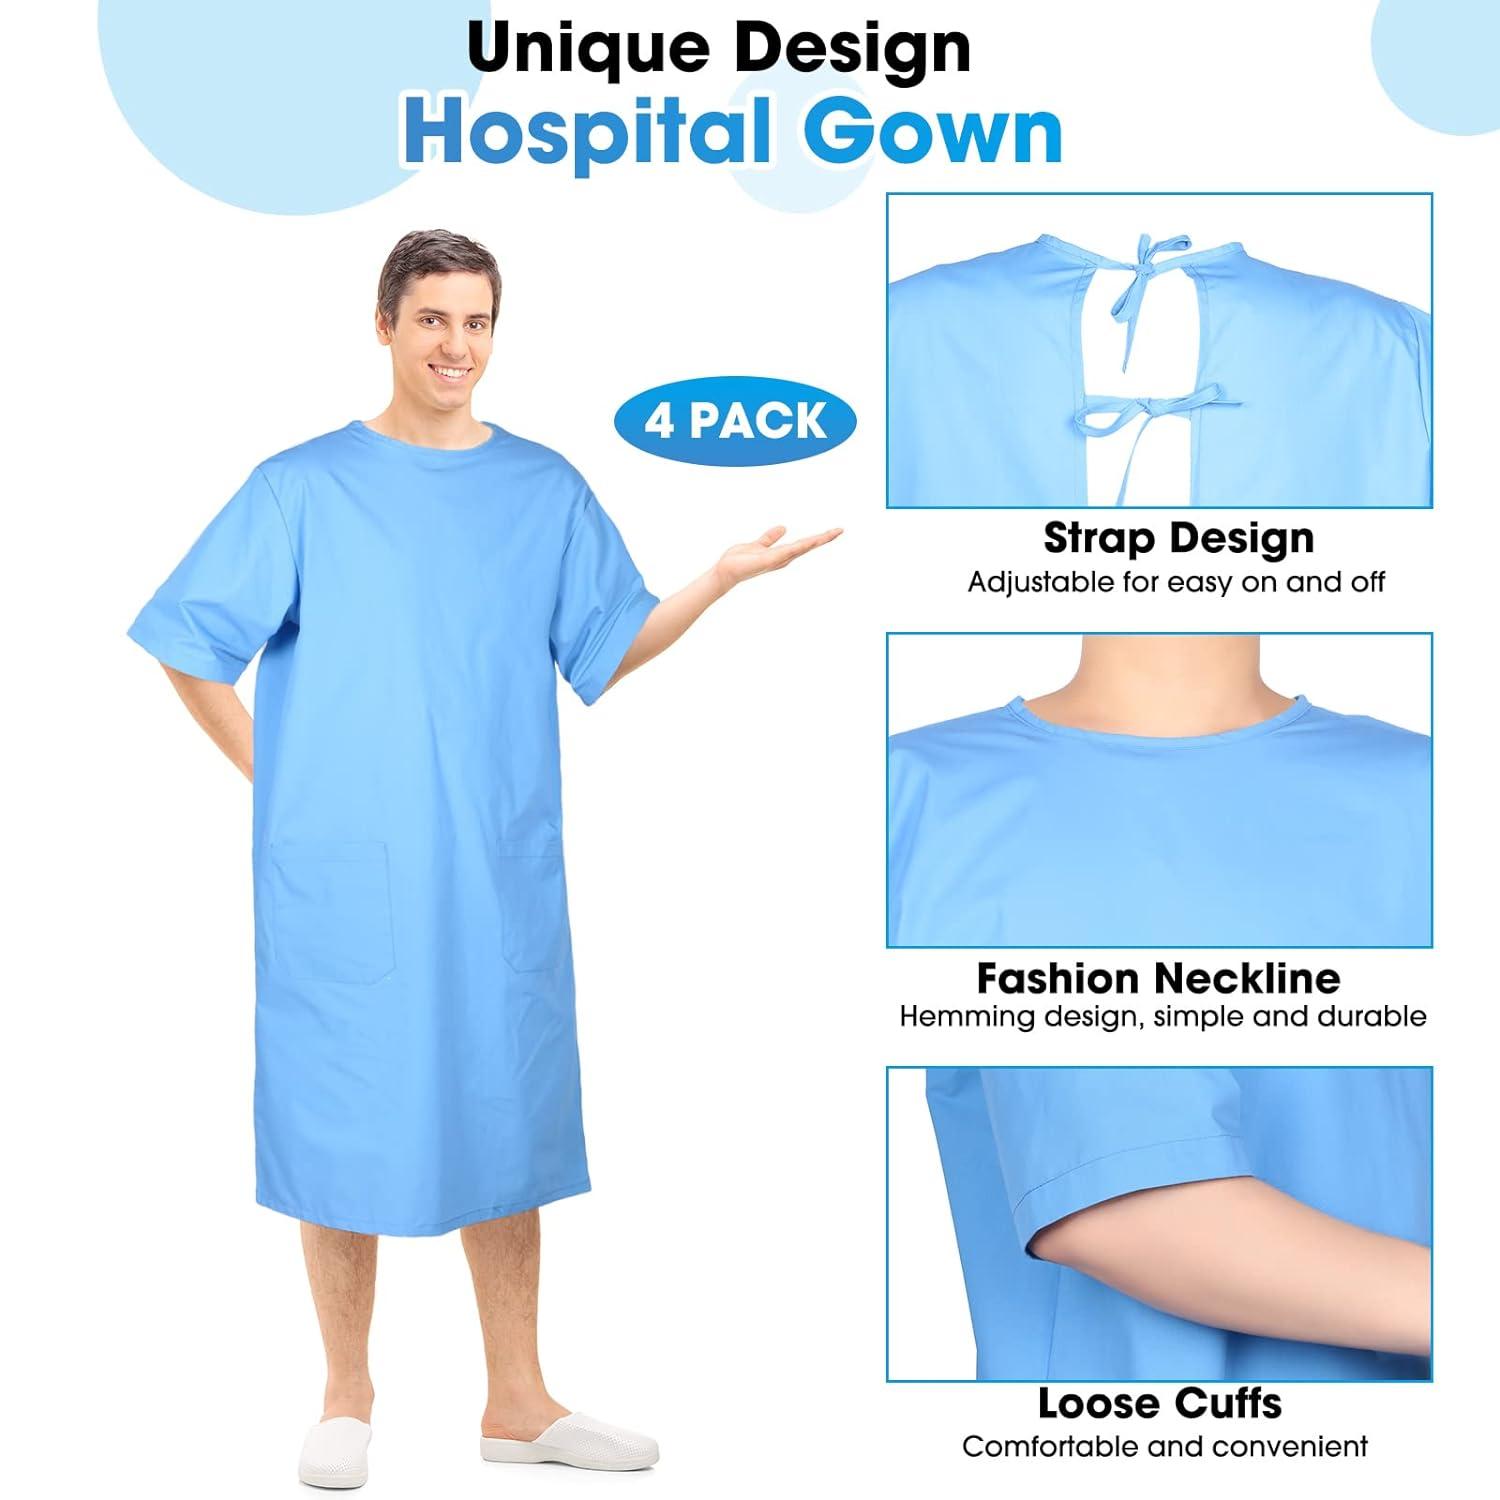 Patient Gown | The I.V. Gown™ | Salk, Inc.